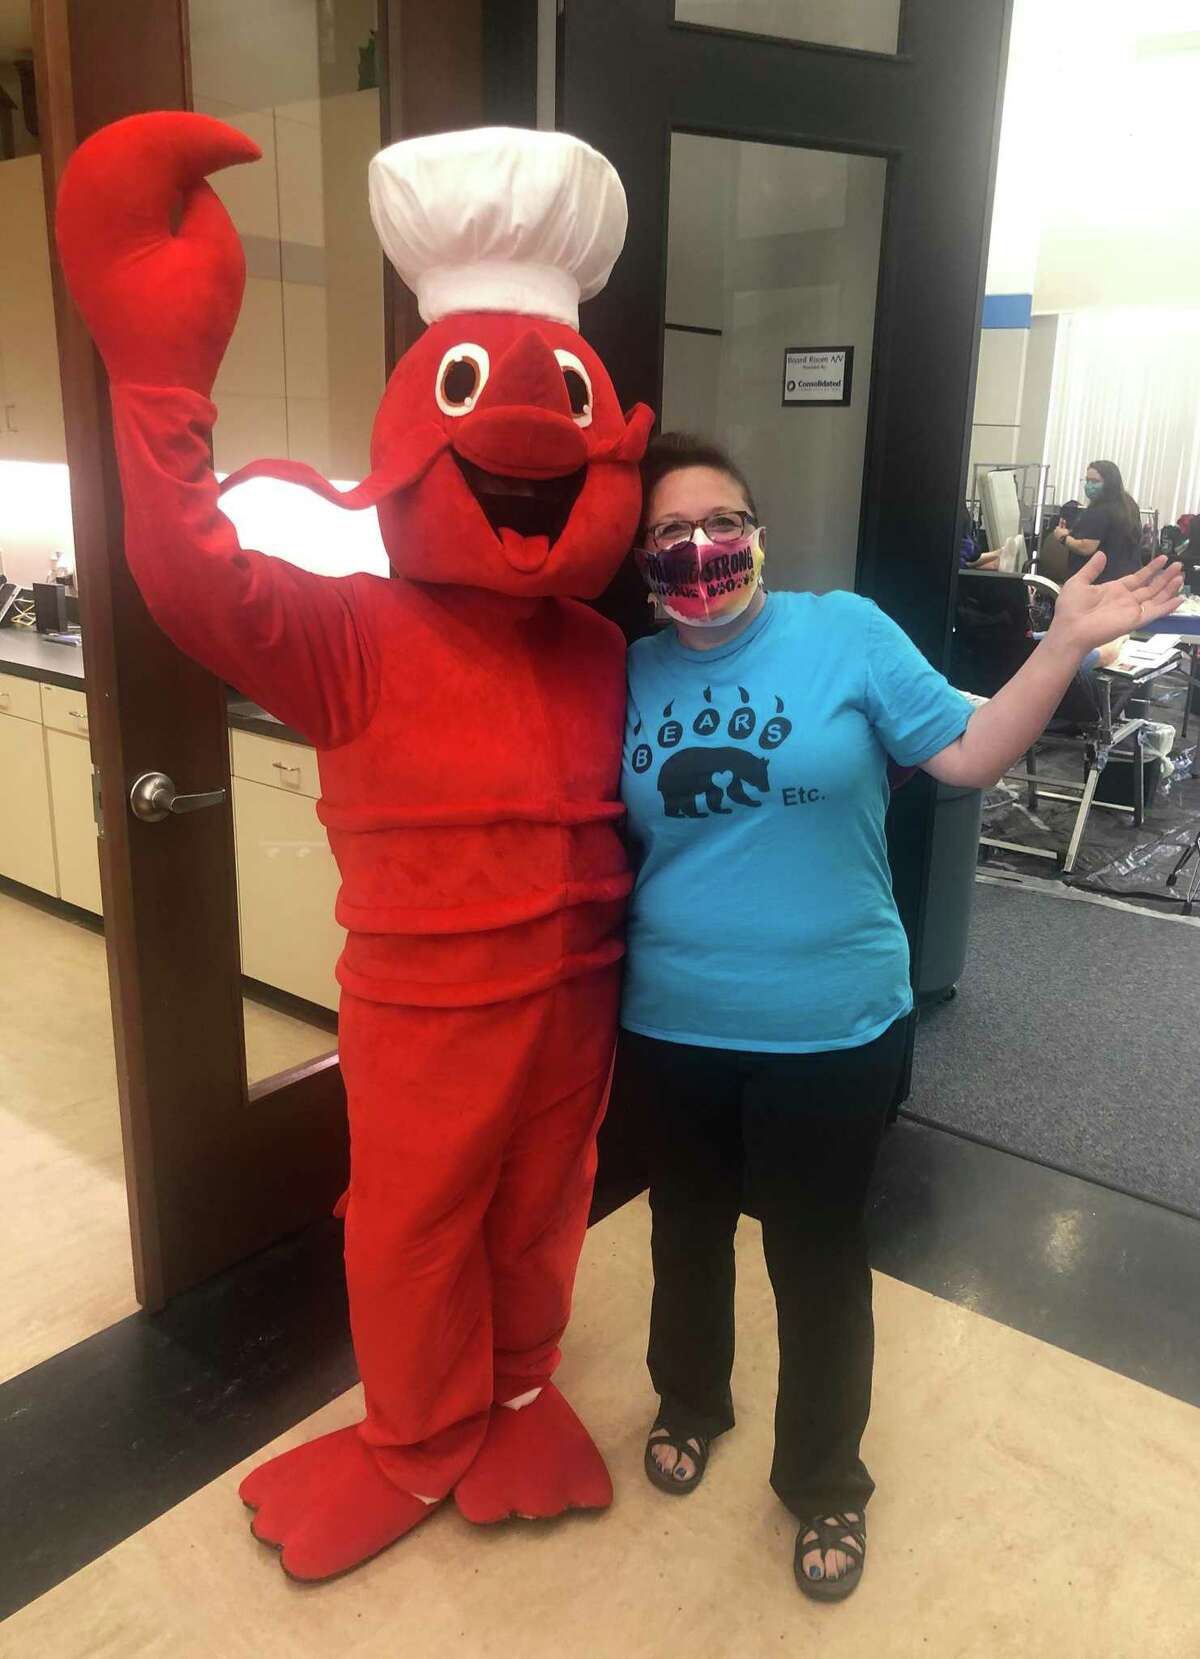 New this year at Lobsterfest is the event’s official mascot, Lucy the Lobster (pictured with Kati Krouse). Lucy will be a the Lobsterfest Dinner To Go Oct. 1 and golf tournament Oct. 2. This year due to COVID-19 the dinner will be to go at the Montgomery County Fairgrounds. Tickets, golf teams and sponsorships are available.